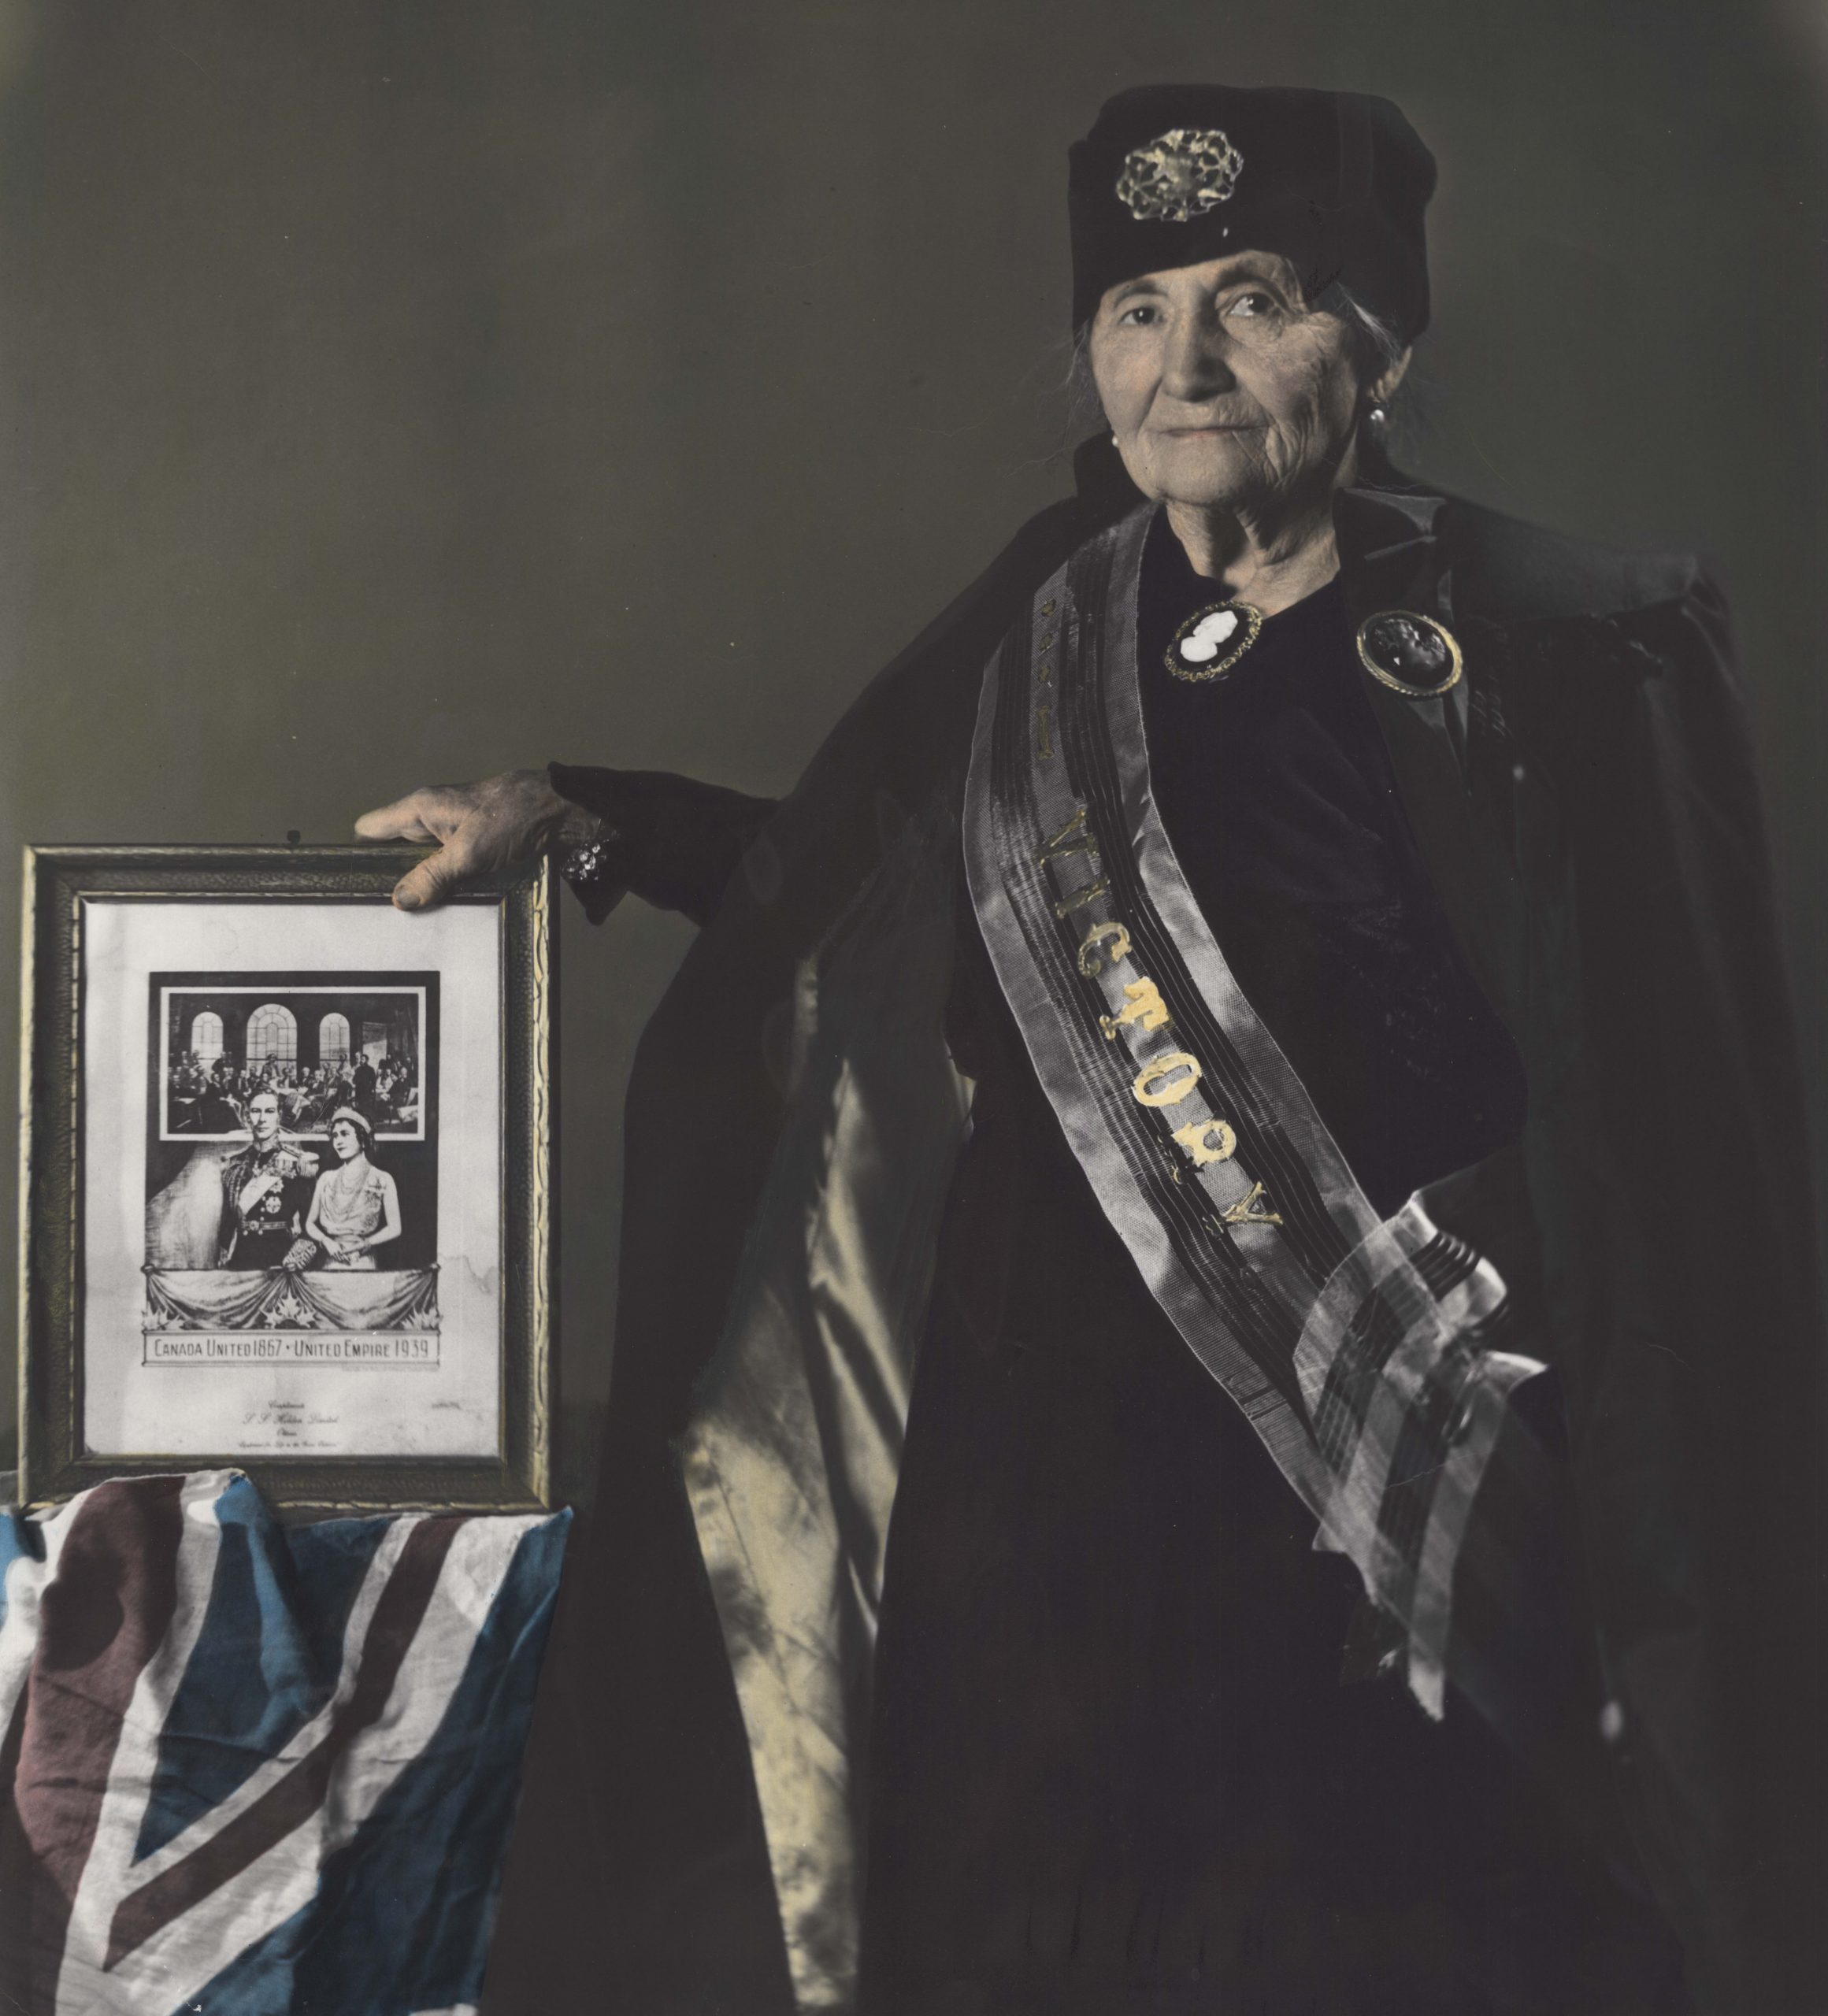 Colourized photograph of Roza Brown as an older woman wearing a dark cape, dress, and hat. A sash with the word Victory in gold lettering is draped over the front of her dress. She is looking at the camera while holding a framed image of King George VI and his wife Queen Elizabeth. A British flag is draped over a table to her left.